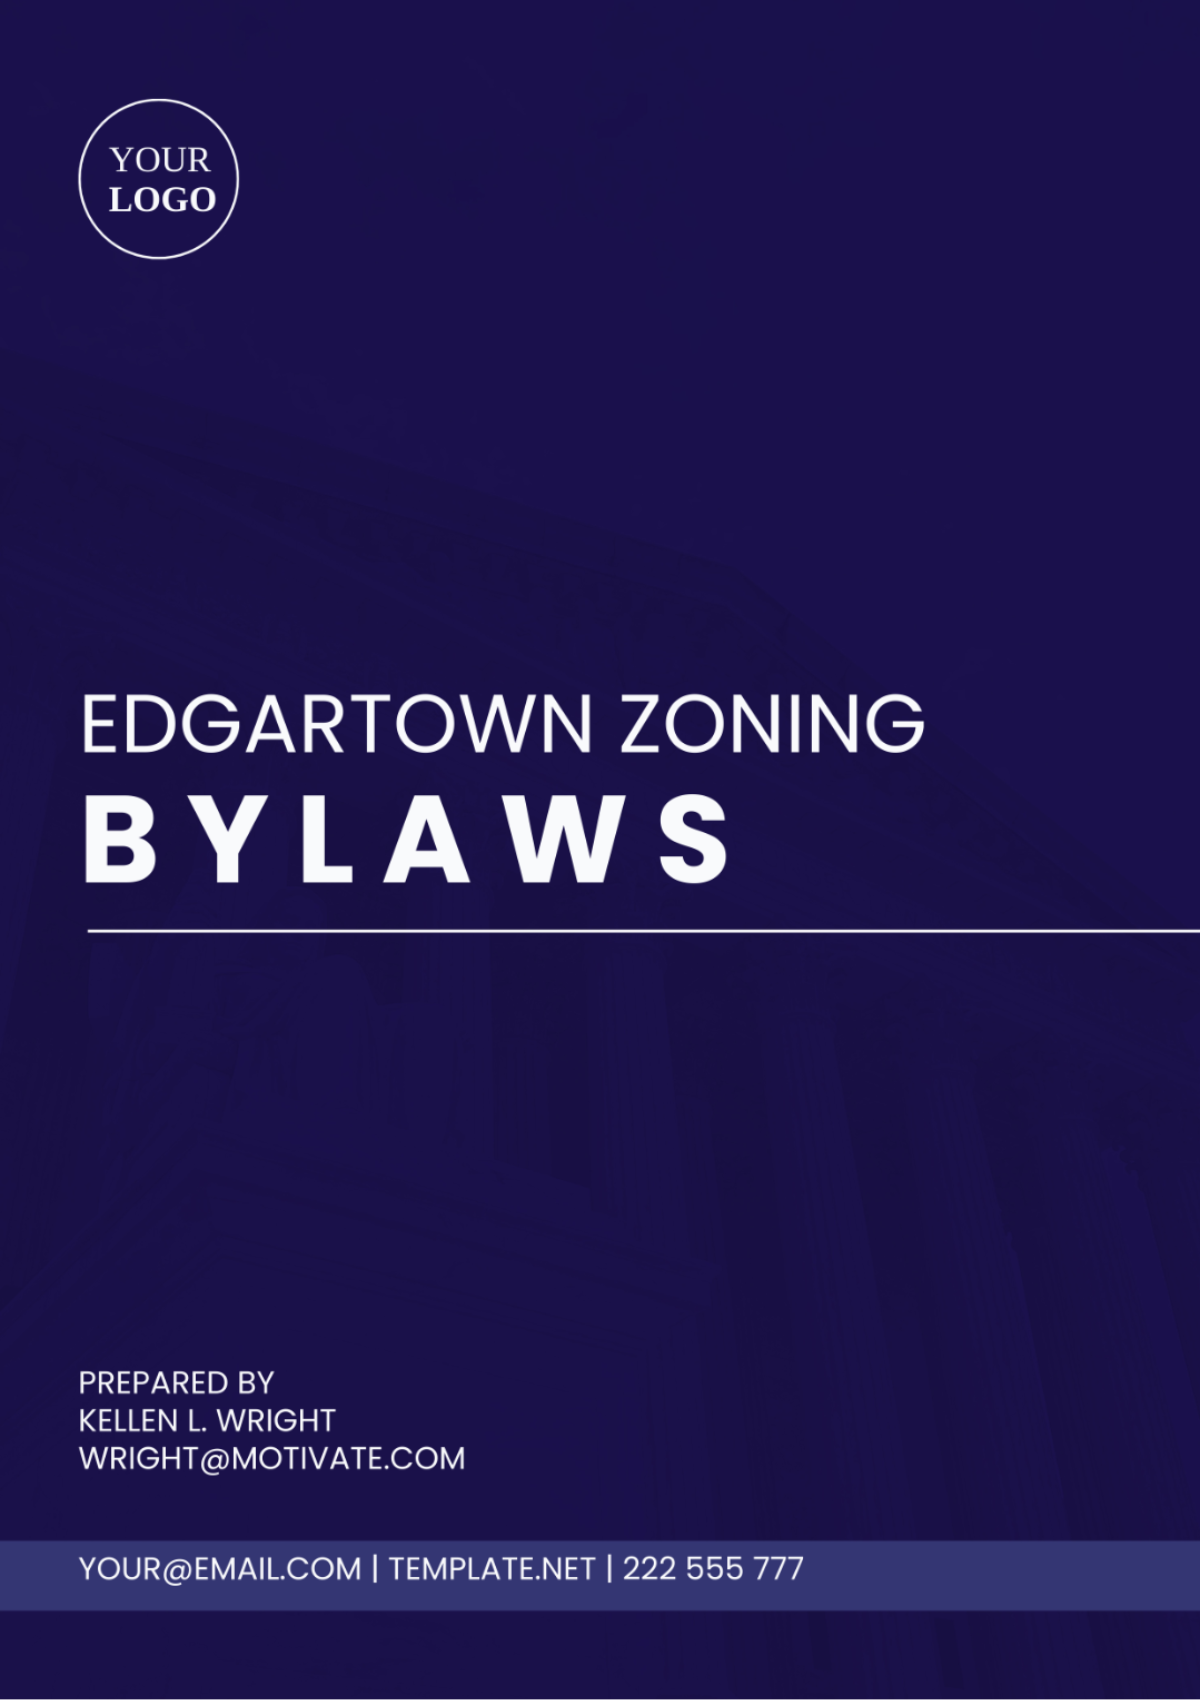 Edgartown Zoning Bylaws Template